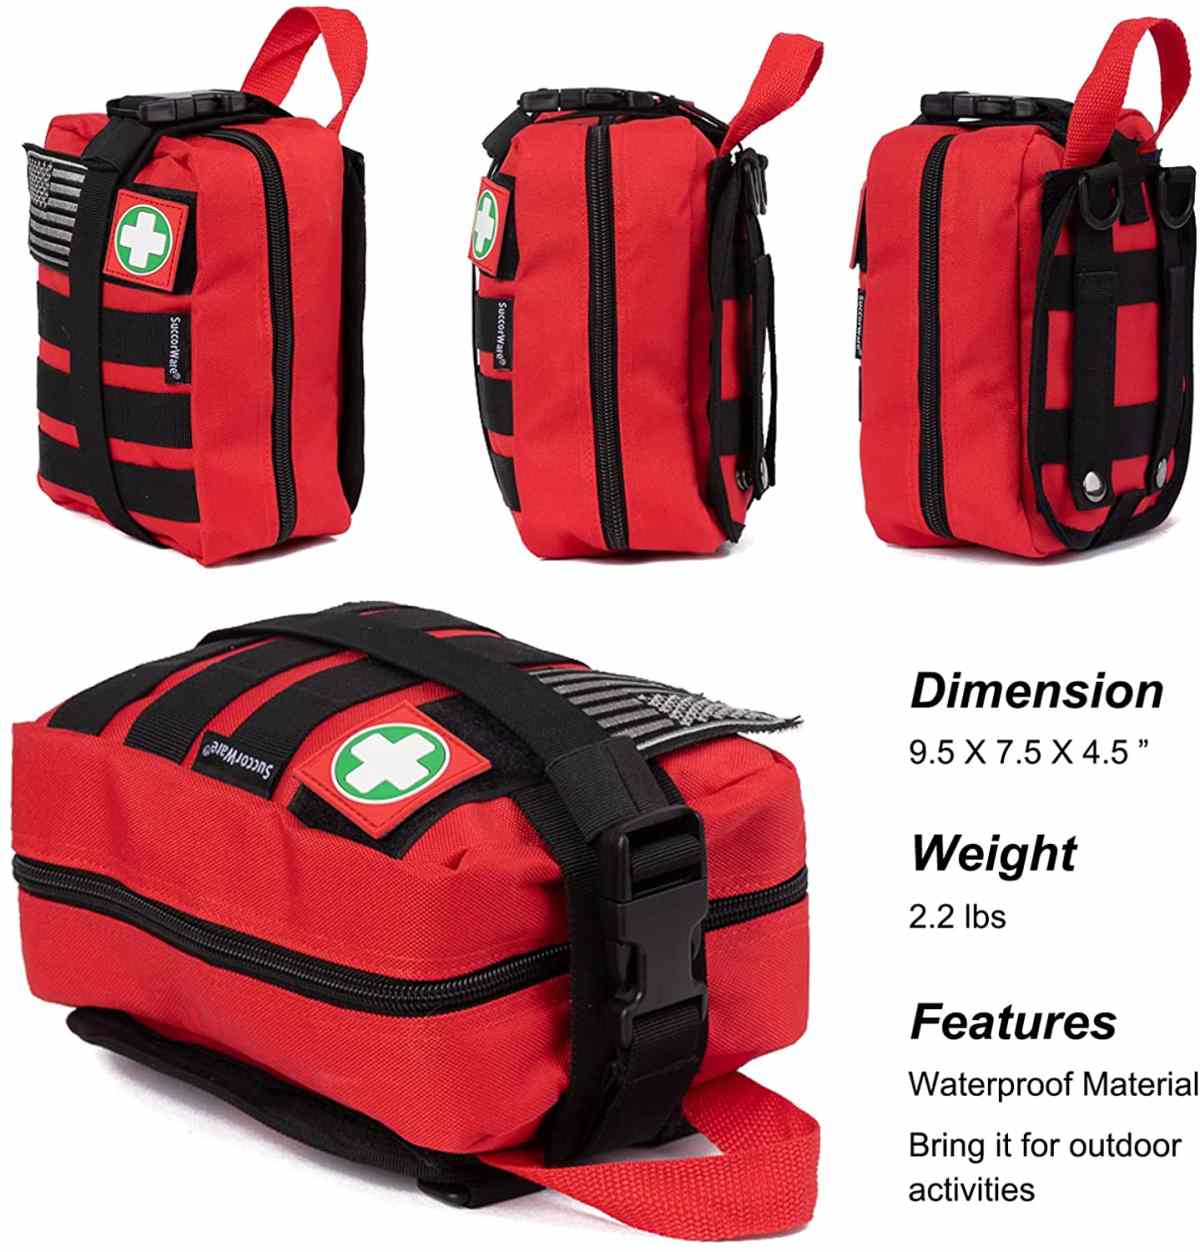 Red Multi-Purpose First Aid Survival Gear for Camping - 3 